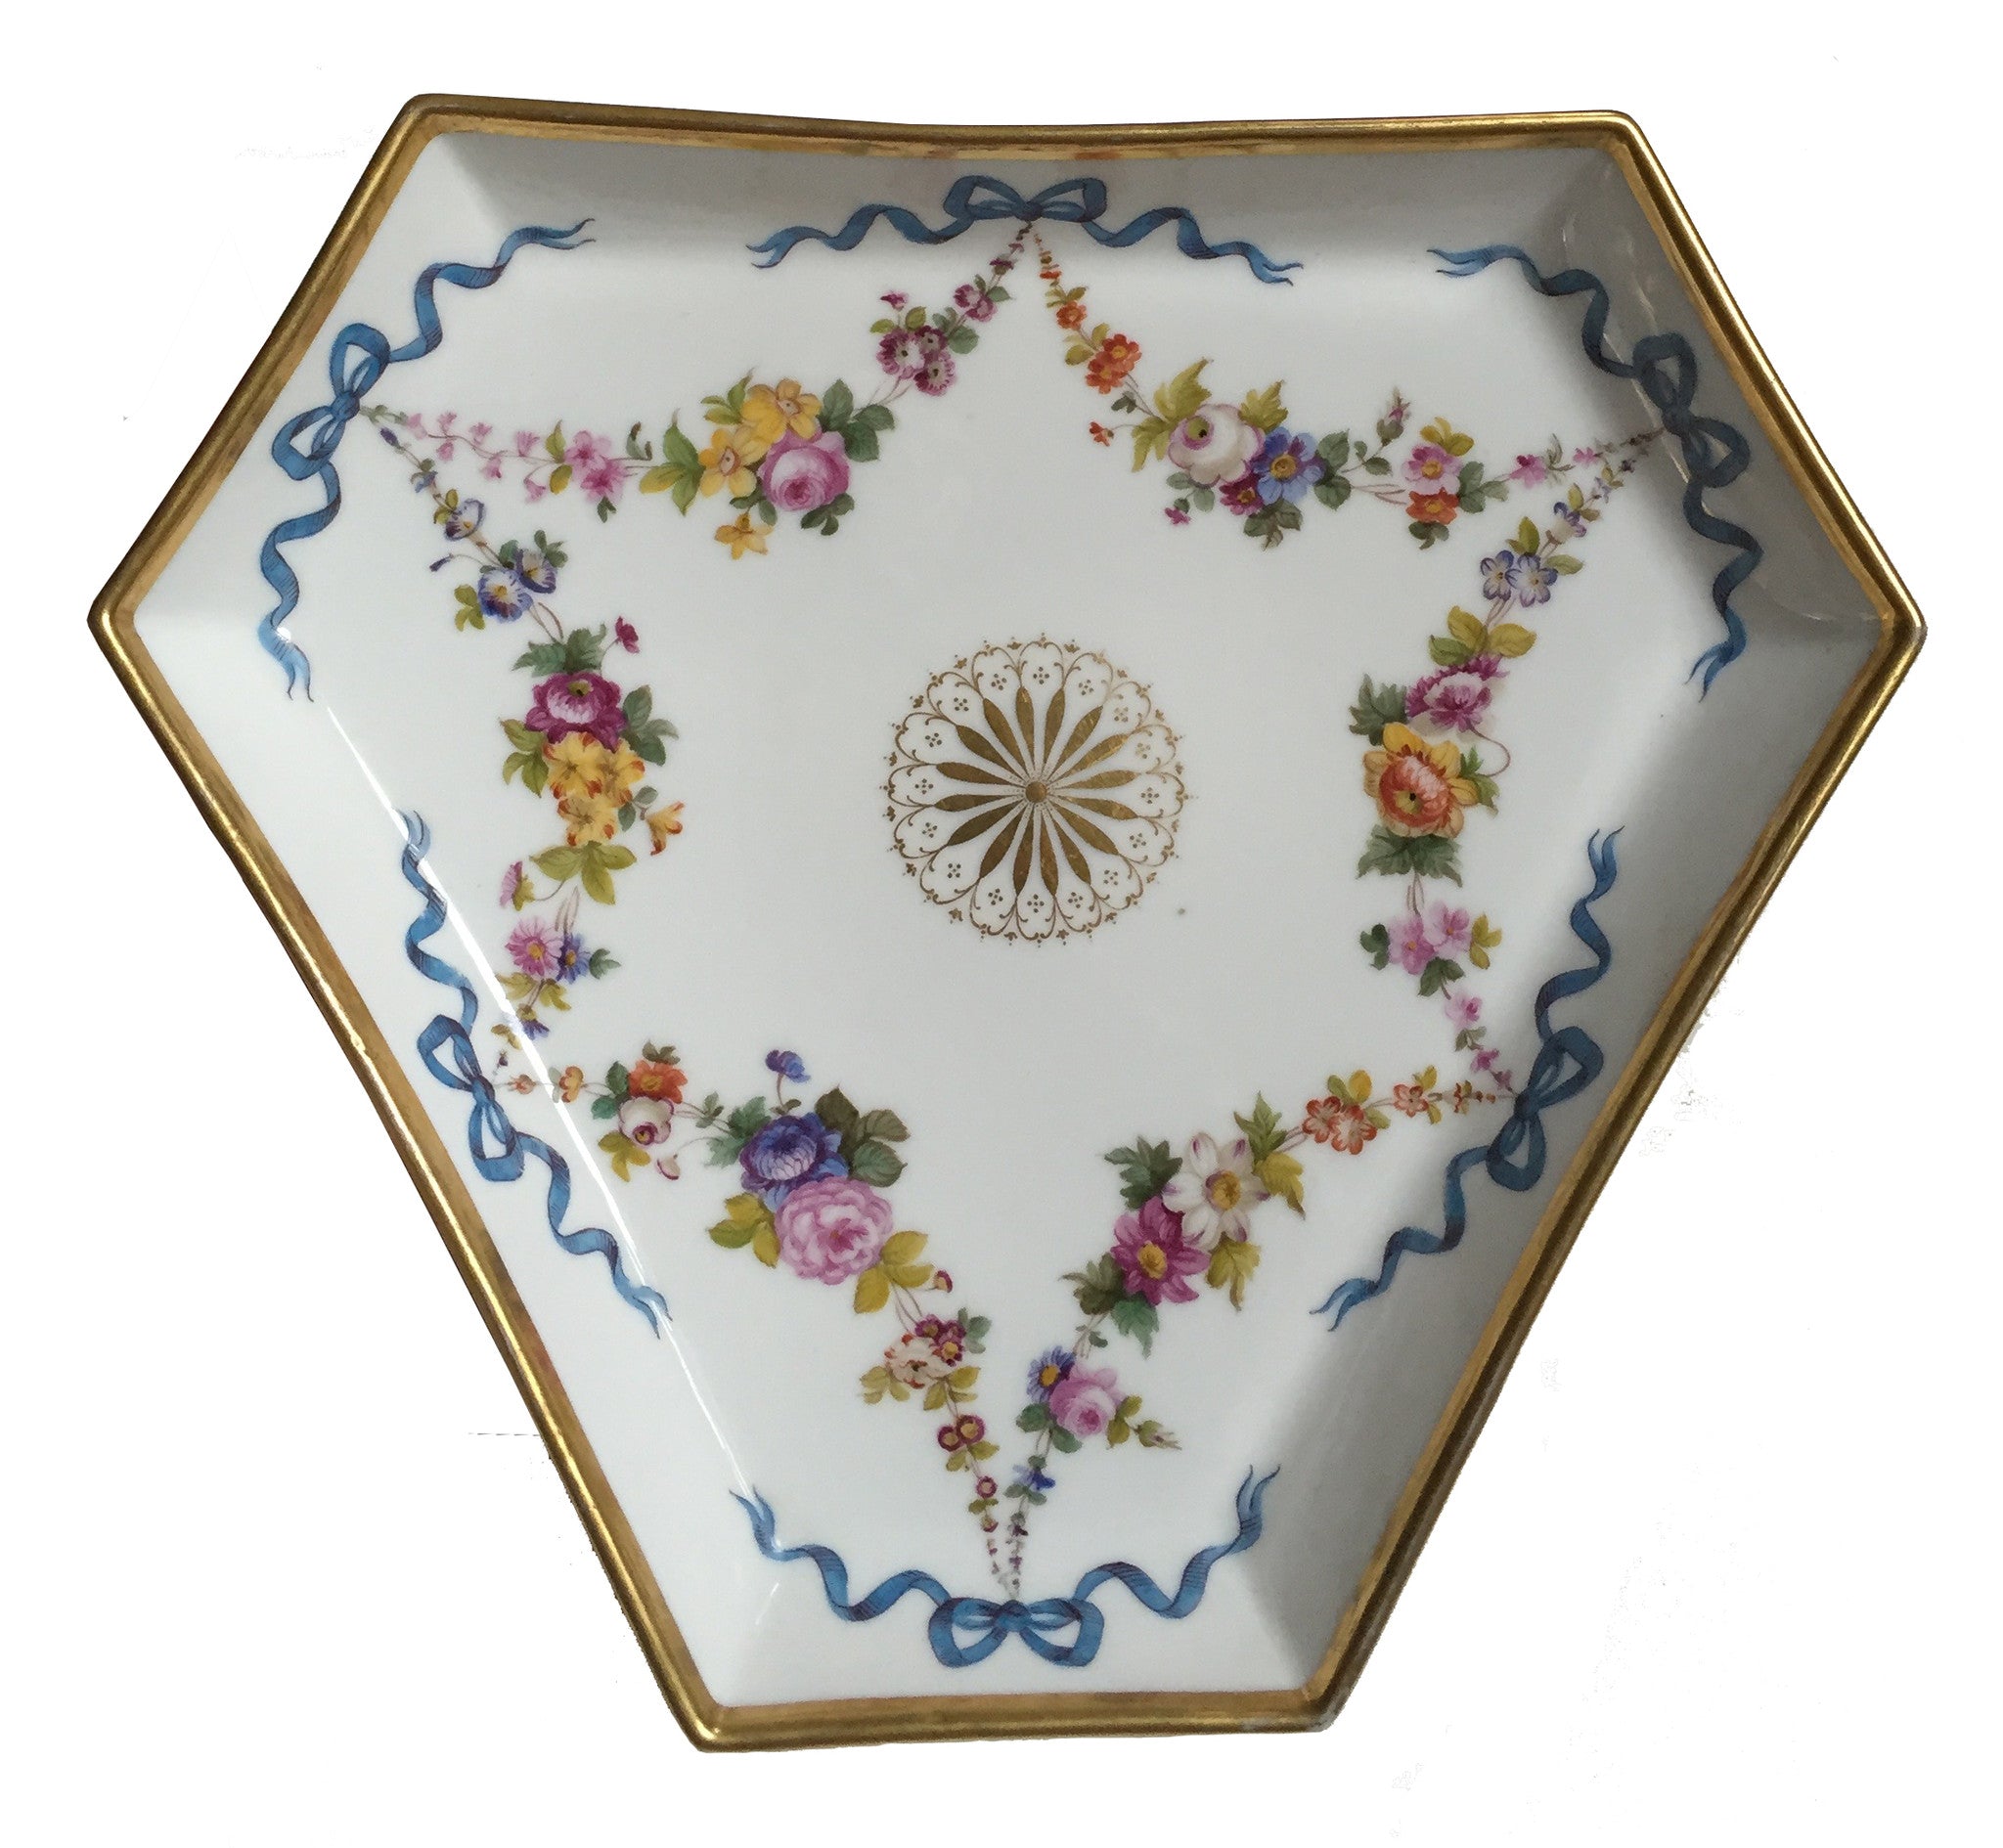 SOLD French Paris Nast Porcelain Shaped Tray, circa 1820